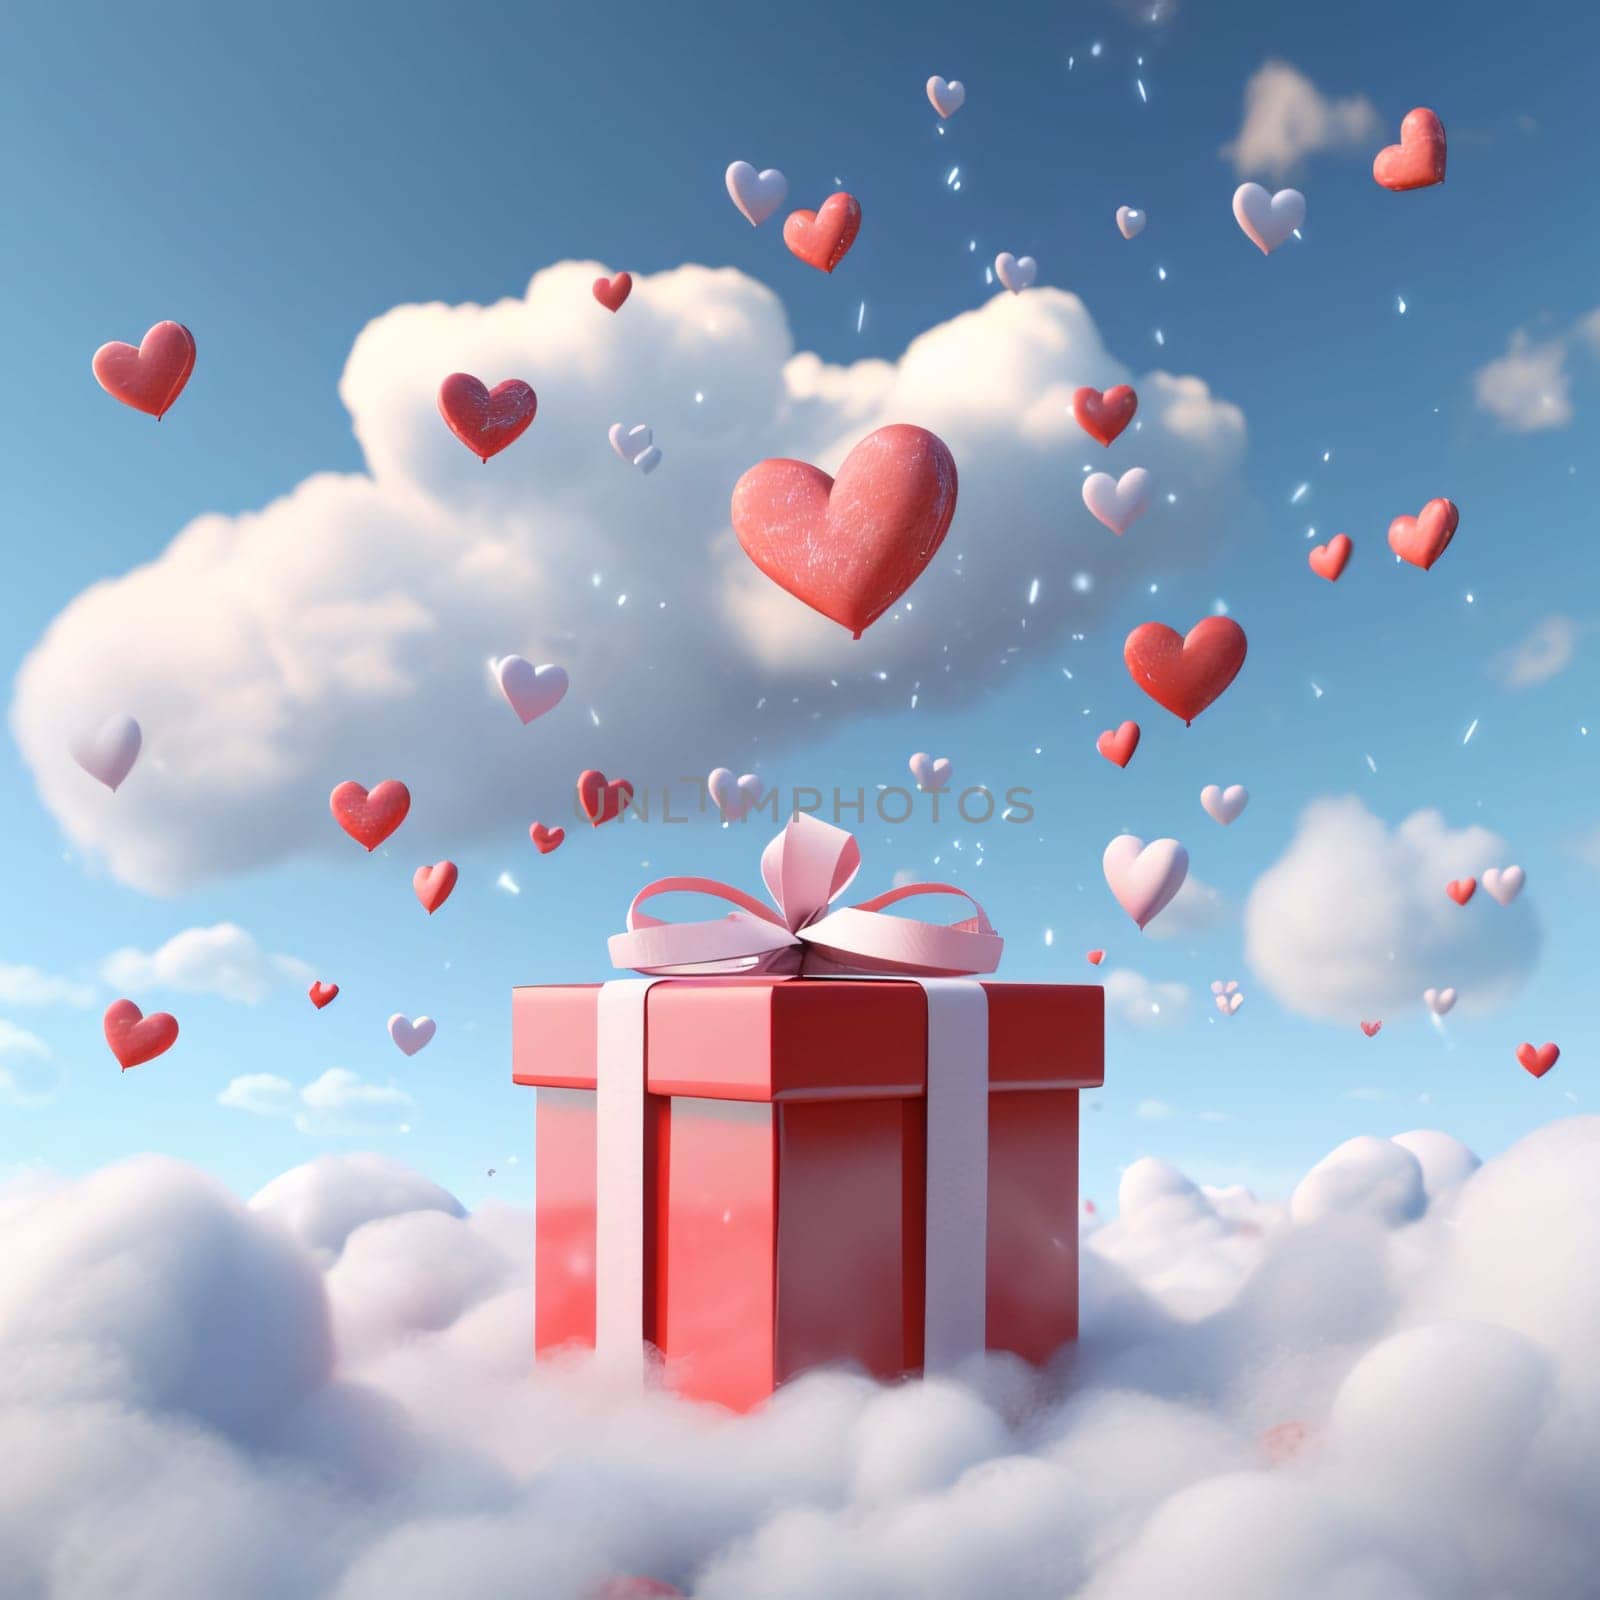 Red gift with pink bow in the clouds around flying red and white hearts. Gifts as a day symbol of present and love. A time of falling in love and love.